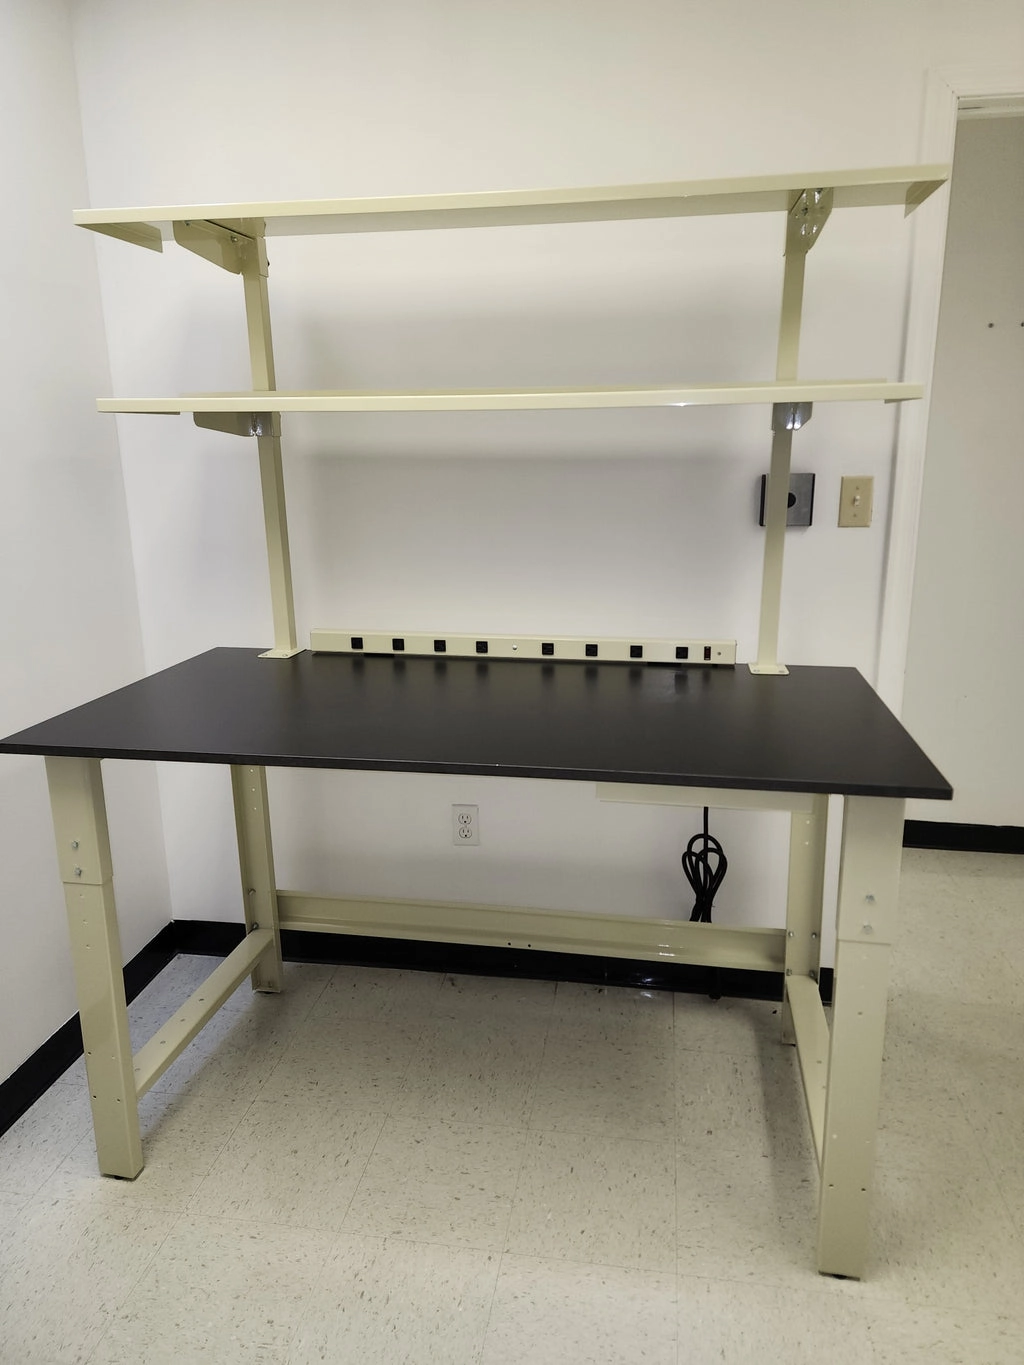 Quick Labs 4 foot light duty Mobile lab bench with phenolic resin countertop, (2) upper shelves, undercounter shelf, power strip, and casters (30"D x 48"L x 36"H-41"H)--adjustable height | QMBL3048-PR